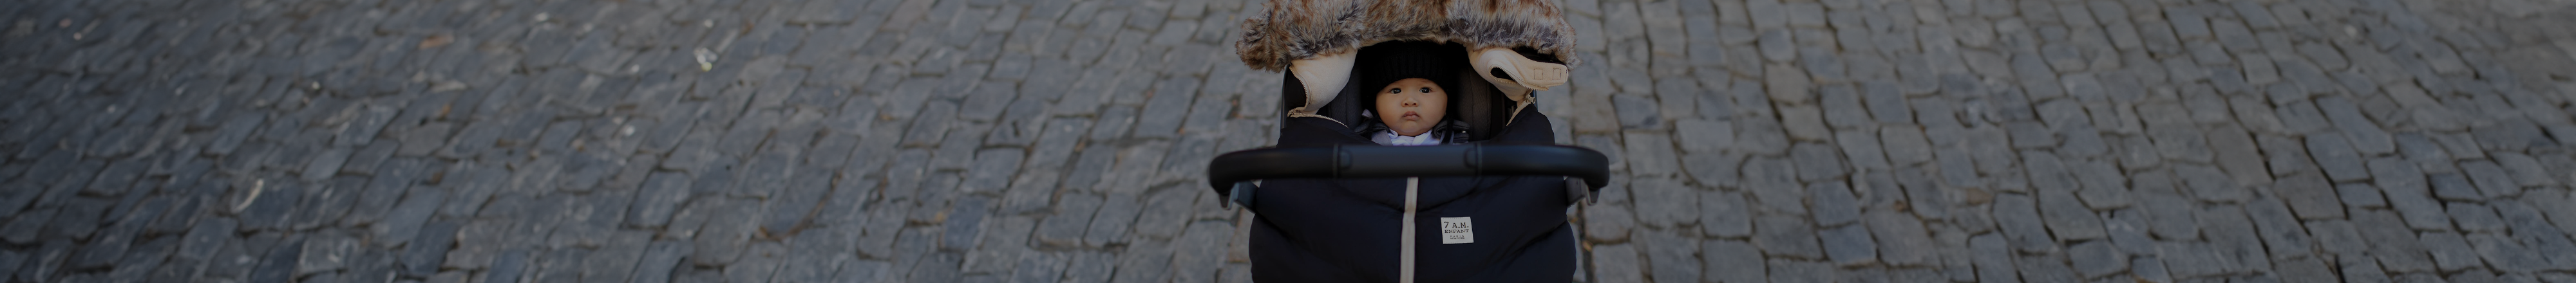 Mom pushing stroller down cobblestone road with infant in car seat cover